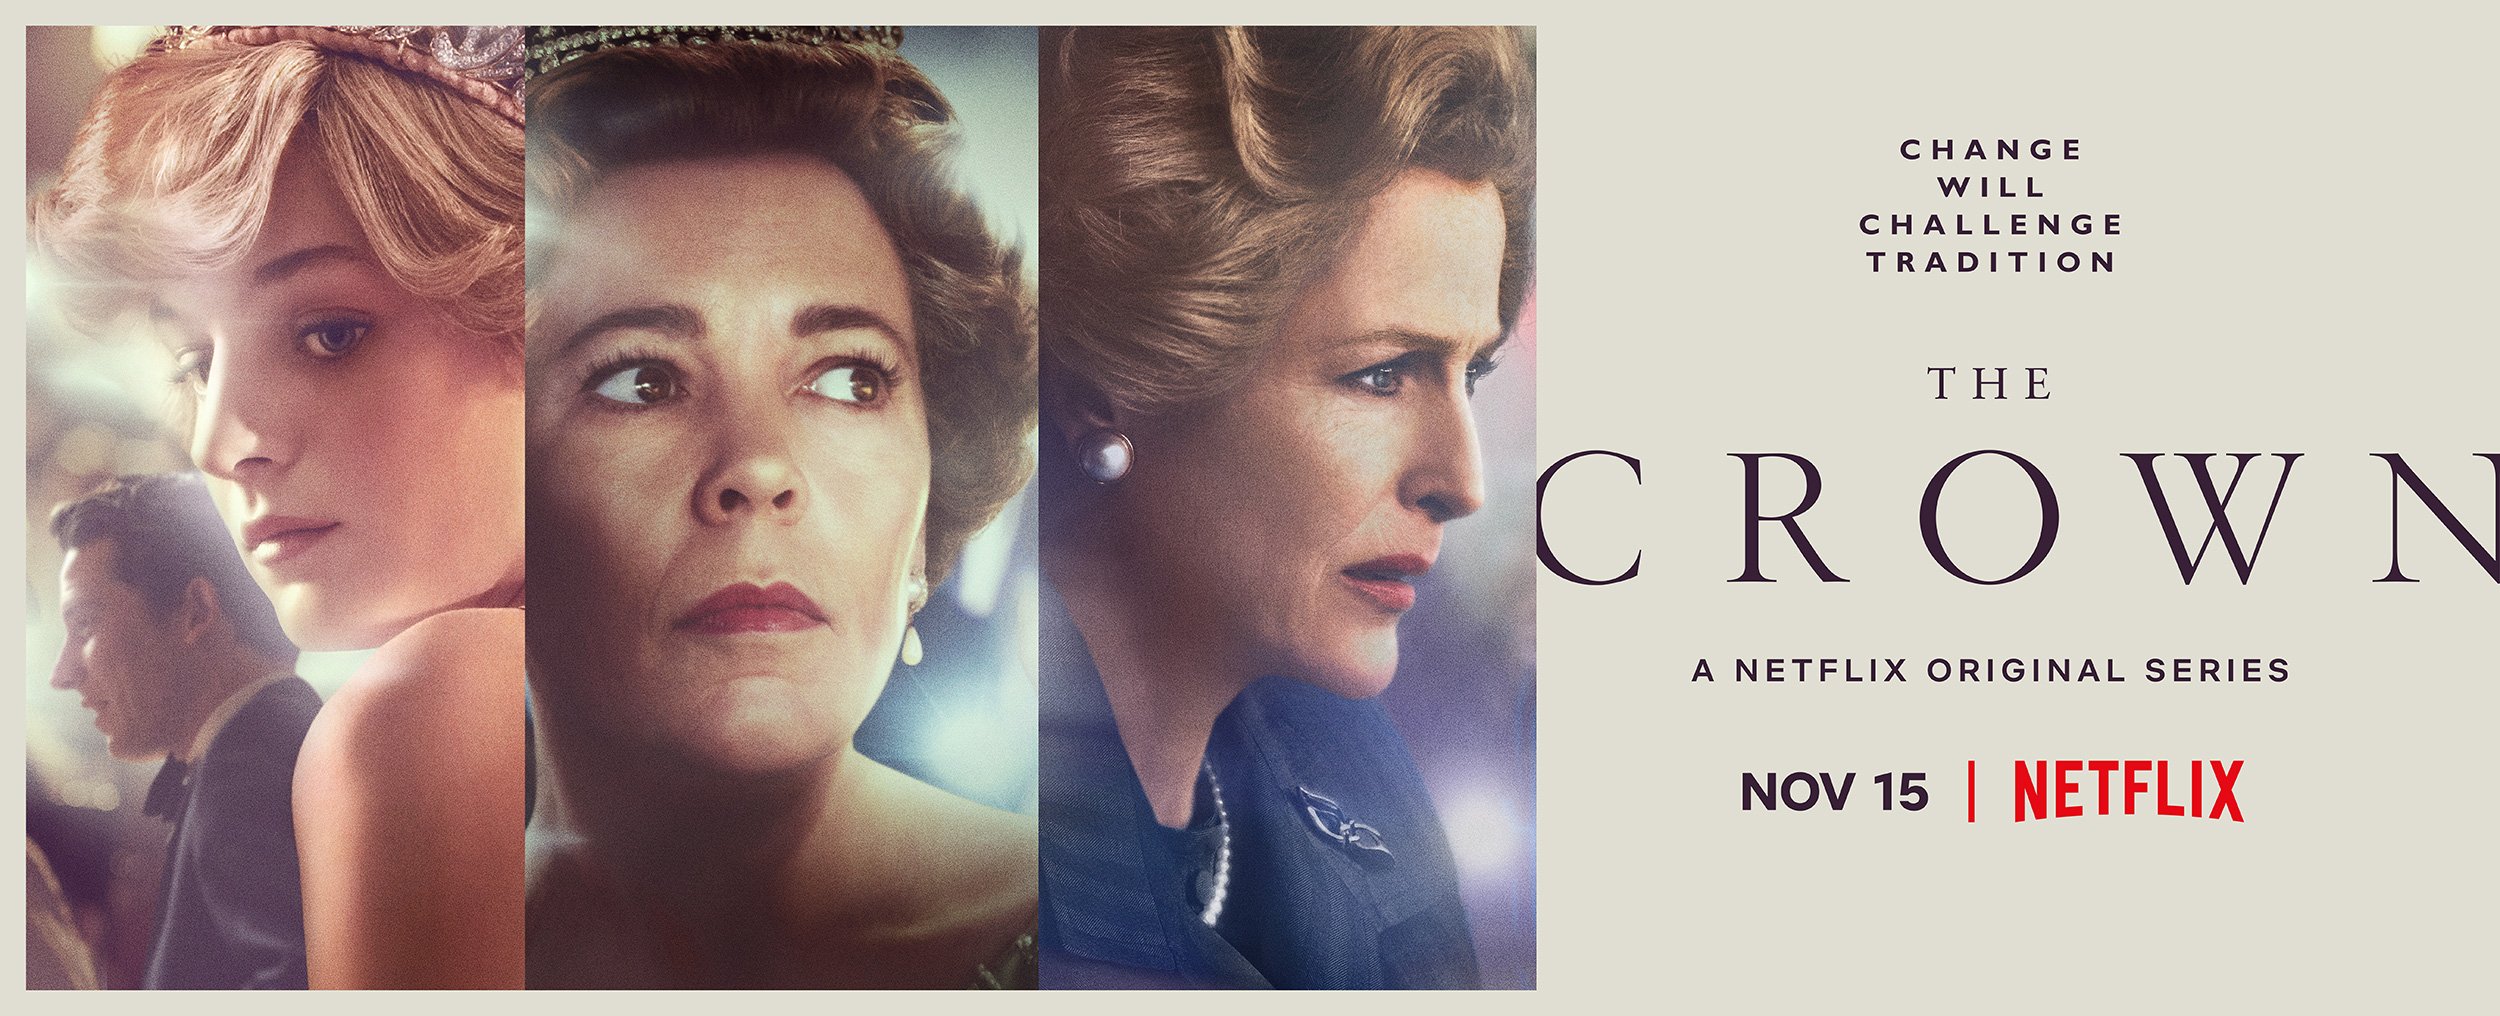 Promotional poster for 'The Crown'